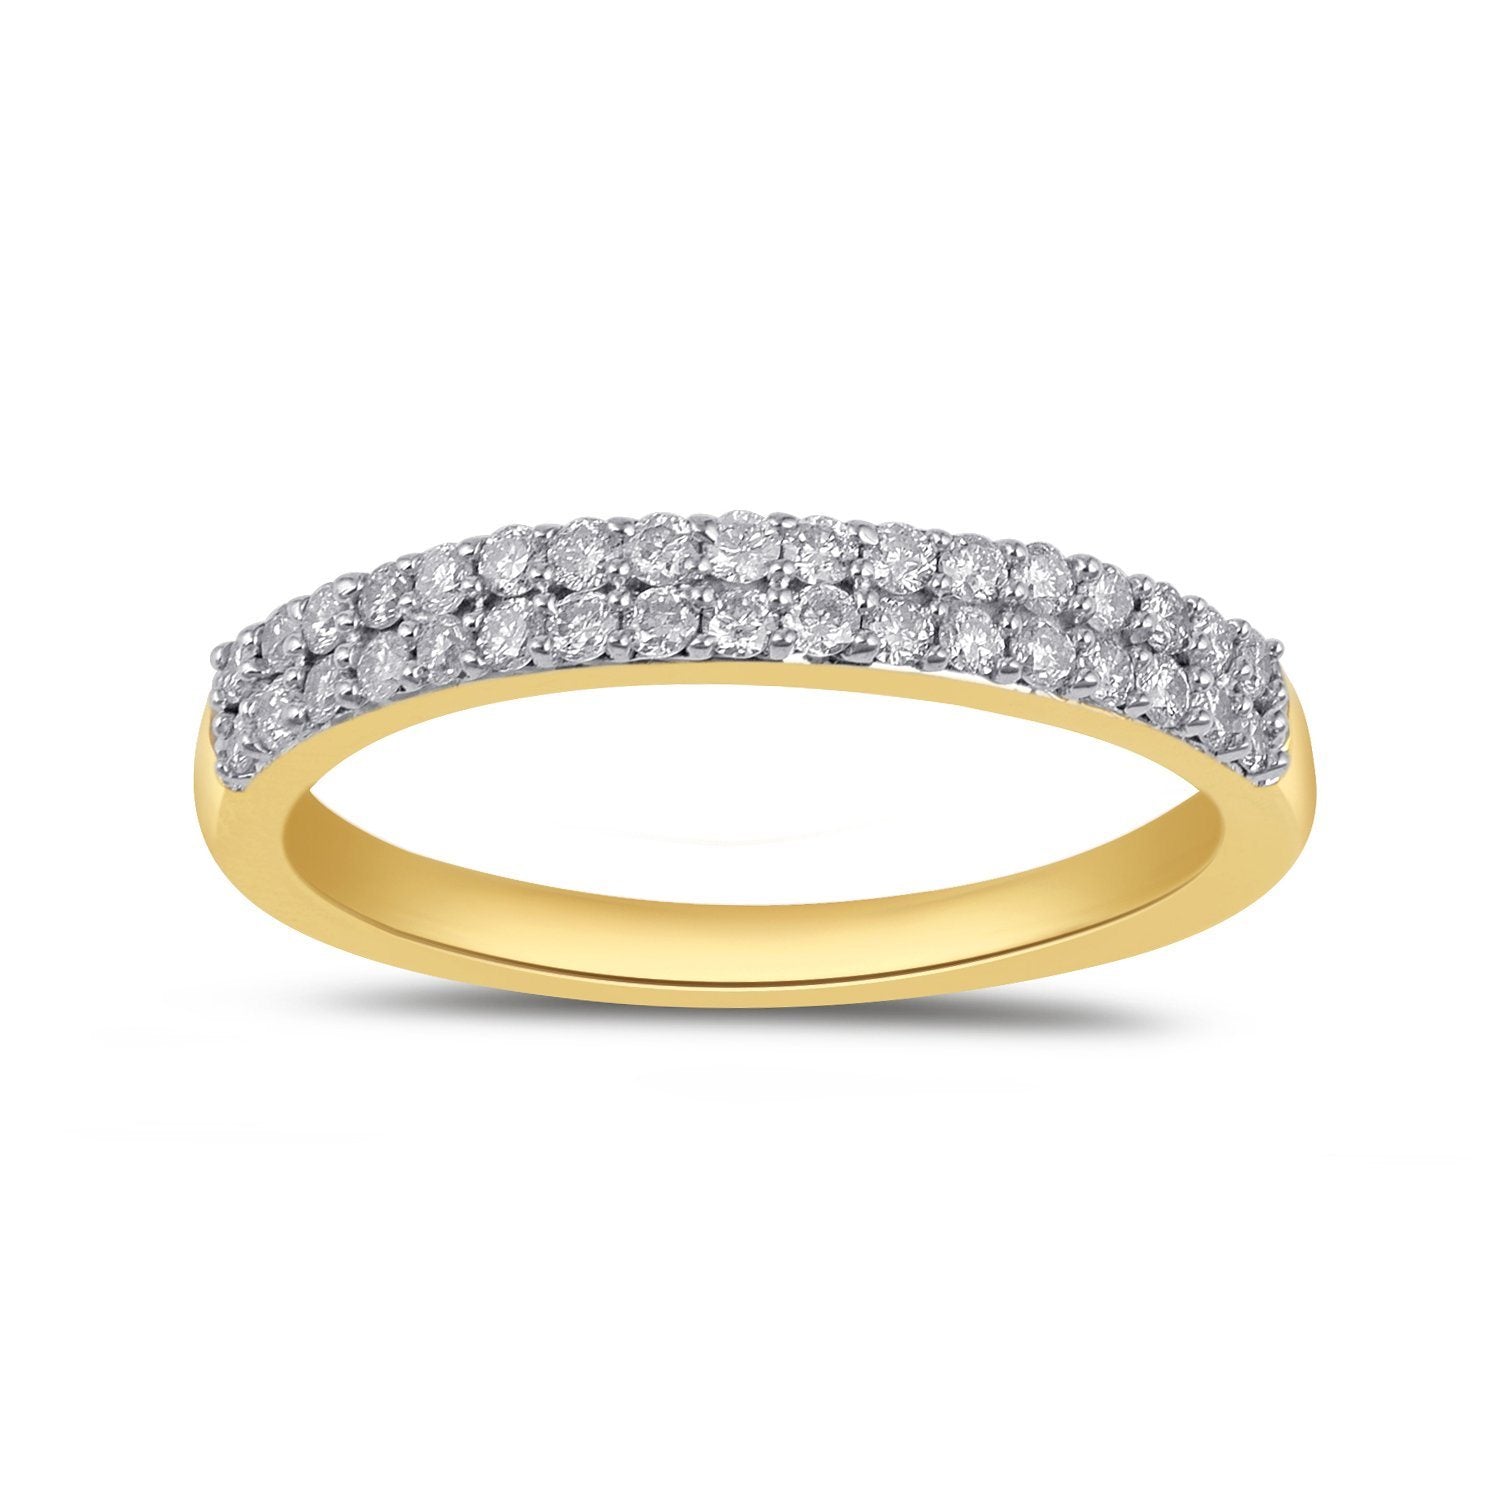 Eternity Ring with 1/3ct of Diamonds in 9ct Yellow Gold Rings Bevilles 